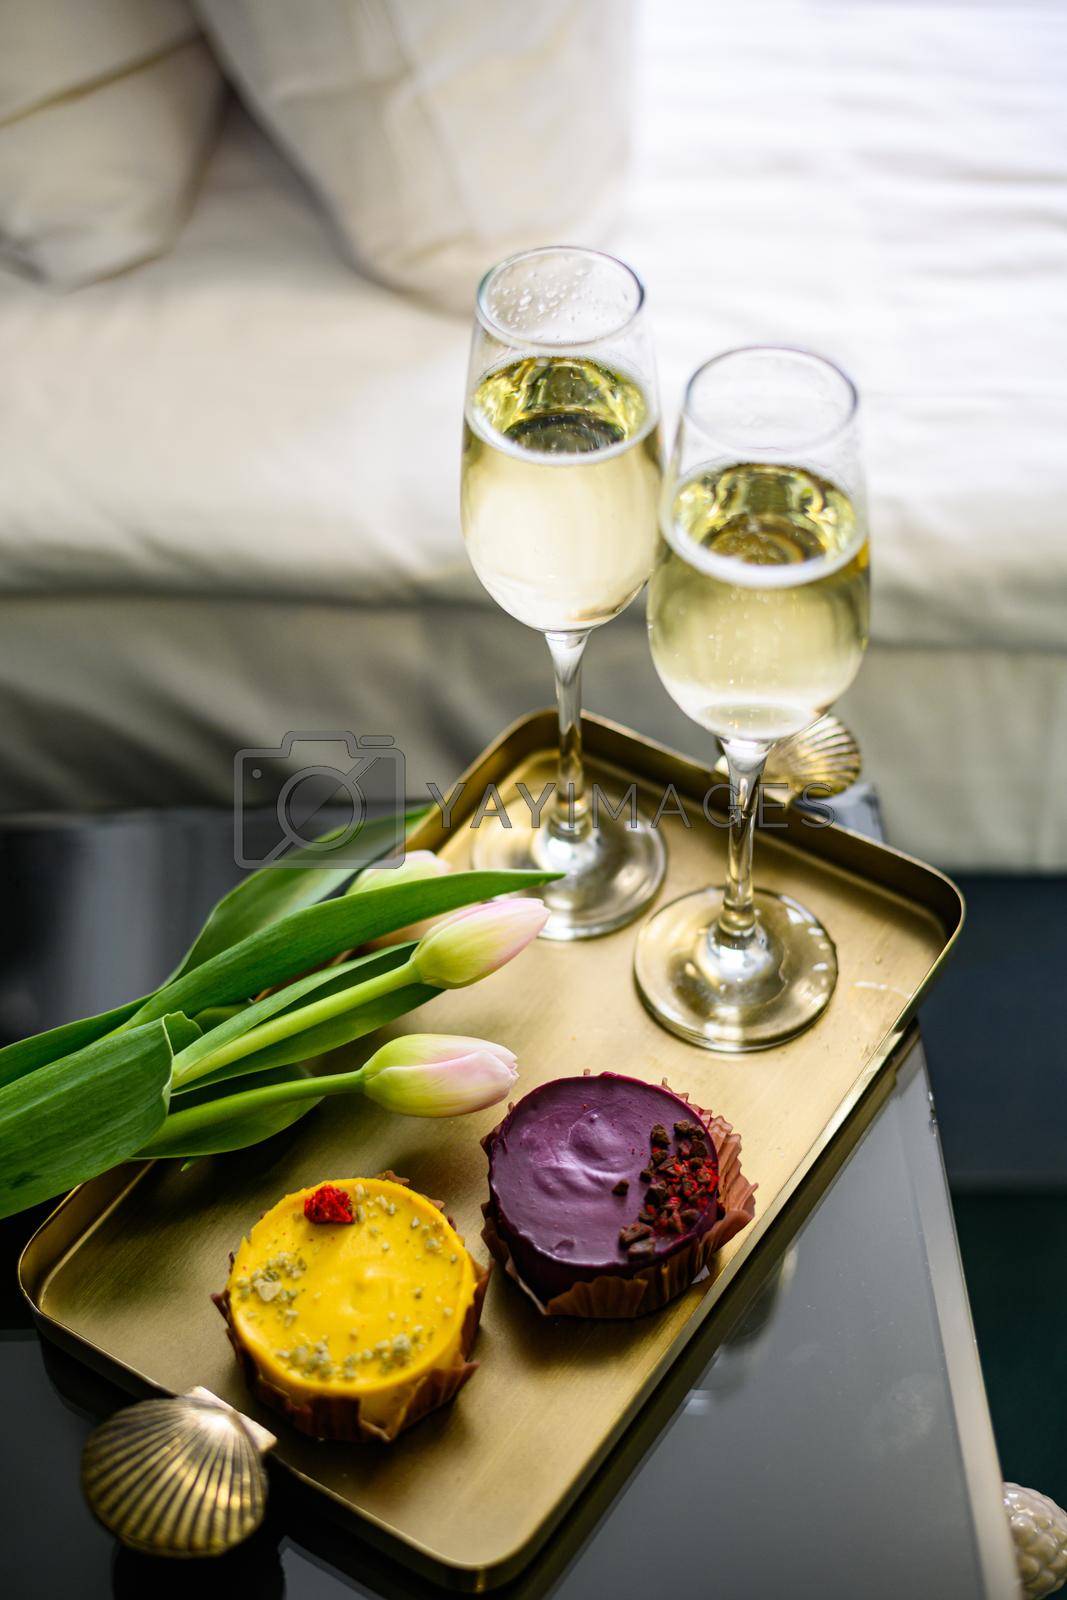 Royalty free image of Hotel service welcome drink by Ilianesolenyi